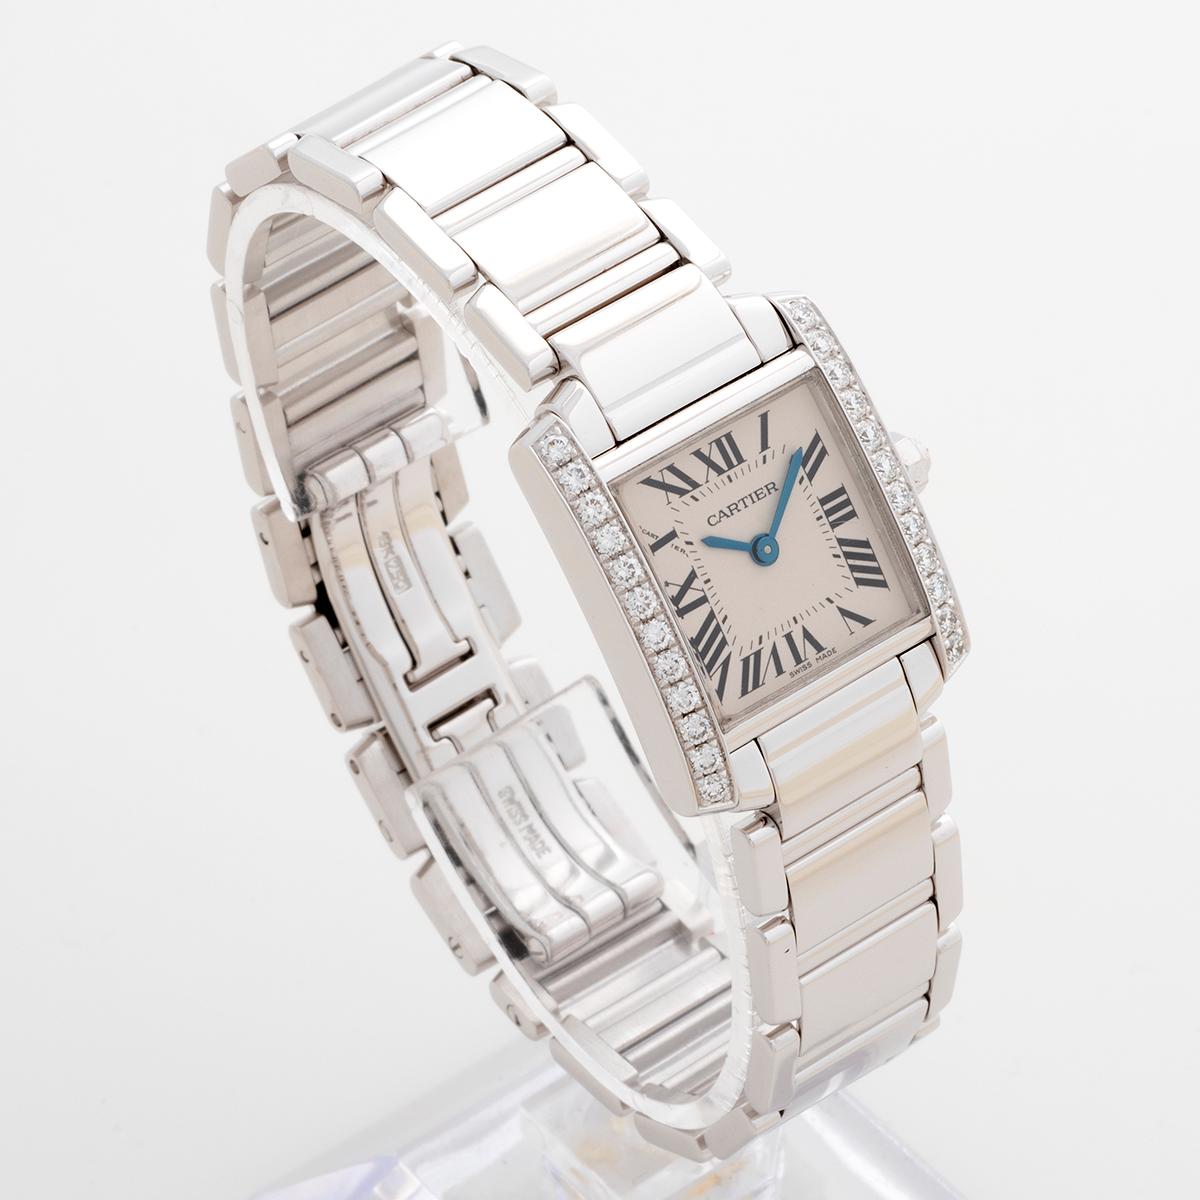 Our stunning Cartier Tank Franciase features a 20mm 18k white gold case factory set with diamonds, and a white gold bracelet. Presented in outstanding condition, this is a highly recognisable statement piece. Our Cartier comes complete with box, the